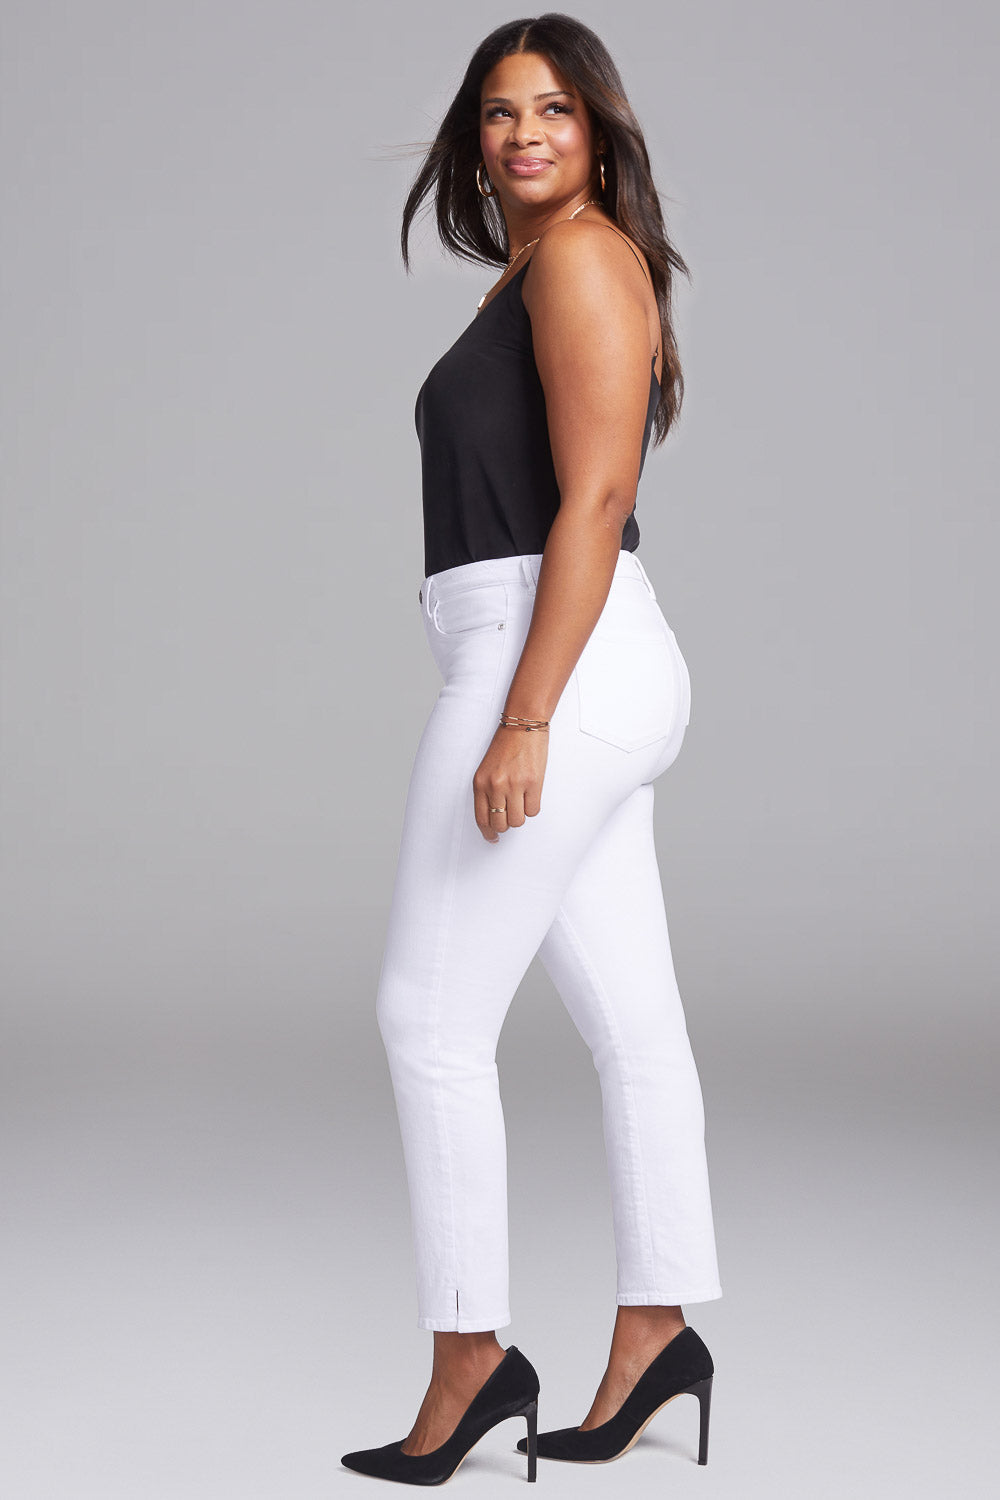 Slim Straight Ankle Jeans In Short Inseam In Curves 360 Denim With Side  Slit - Optic White White | NYDJ